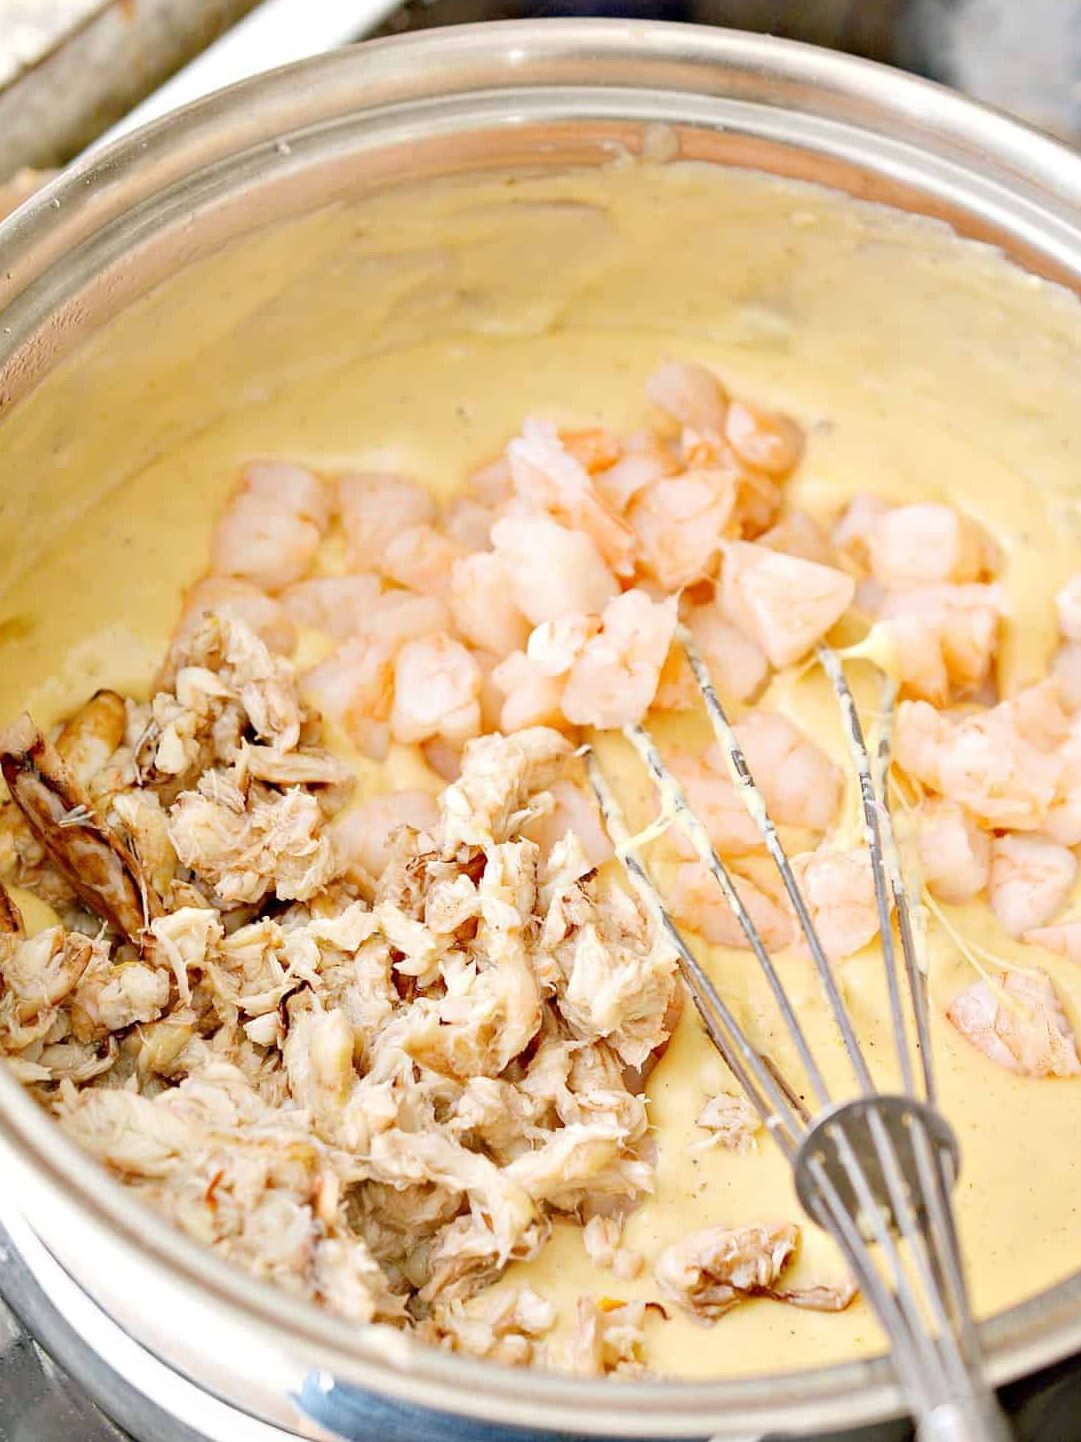 Stir the seafood into the cheese mixture, and cook until heated through.